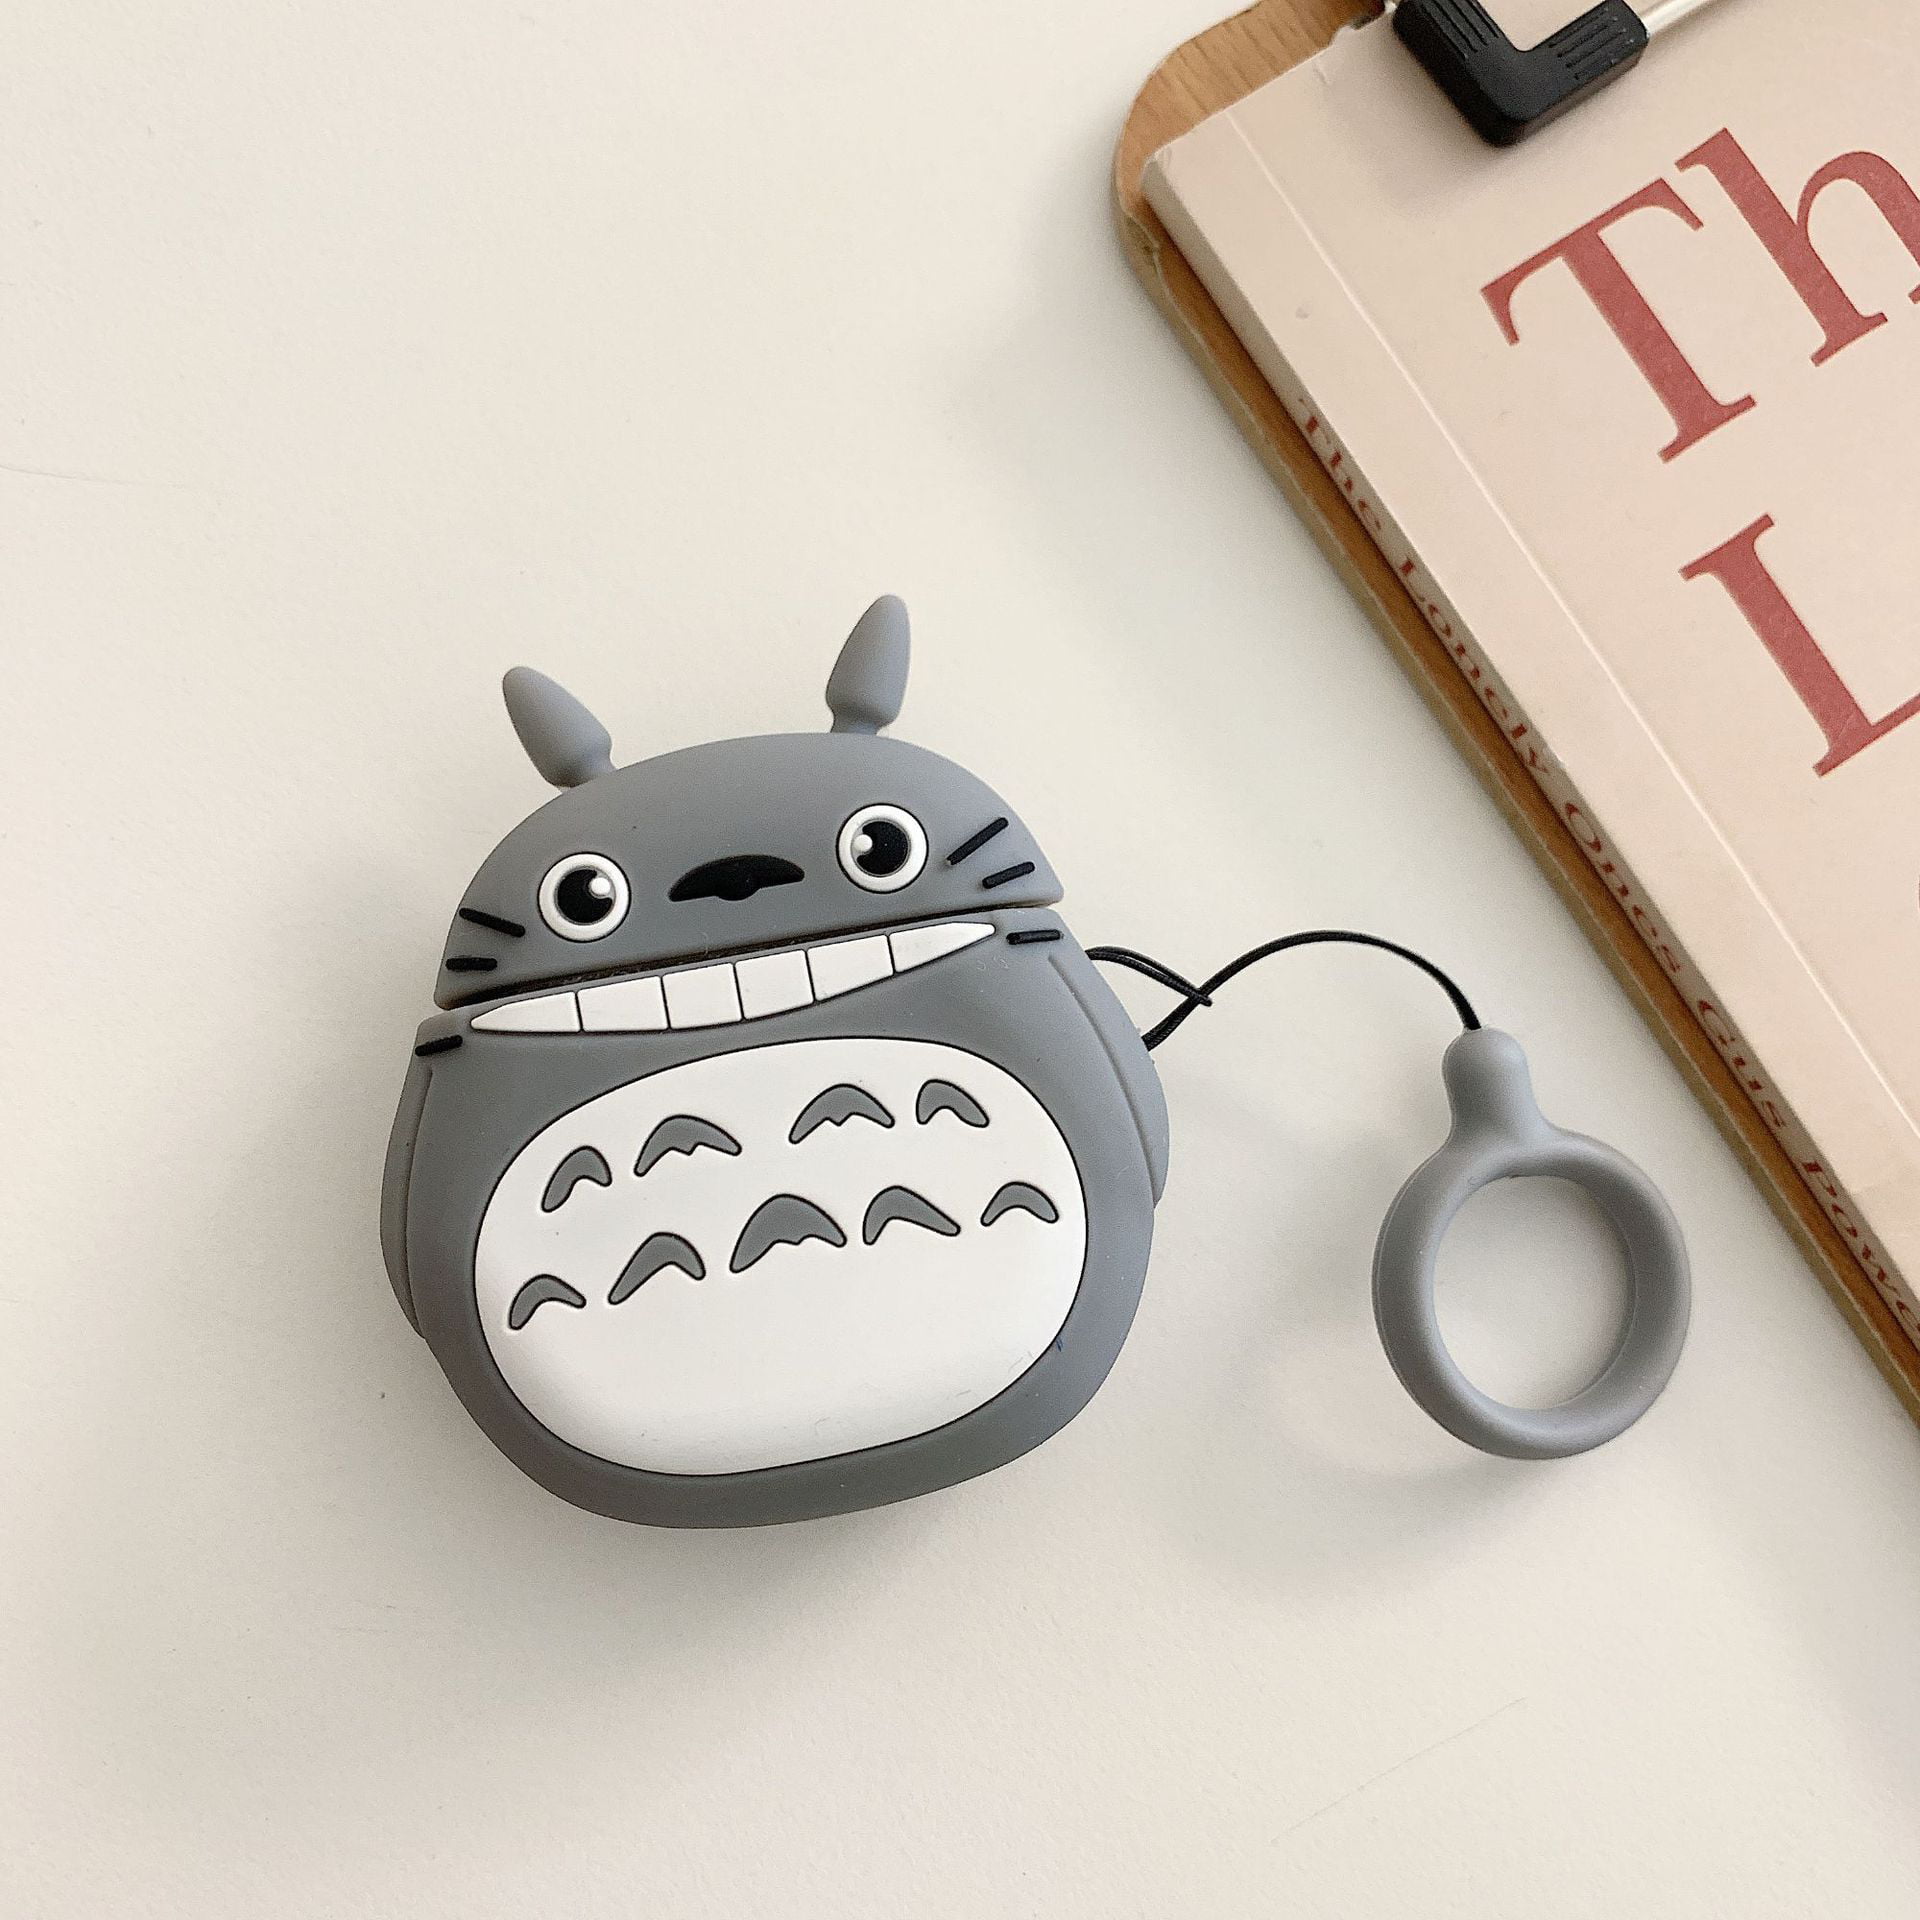 AirPods Case Cute Cartoon 3D Fun, GMYLE Silicone Protective Shockproof Earbuds Case Cover Skin Lovely Compatible Apple AirPods 1 & 2 (Smile Totoro) - Walmart.com